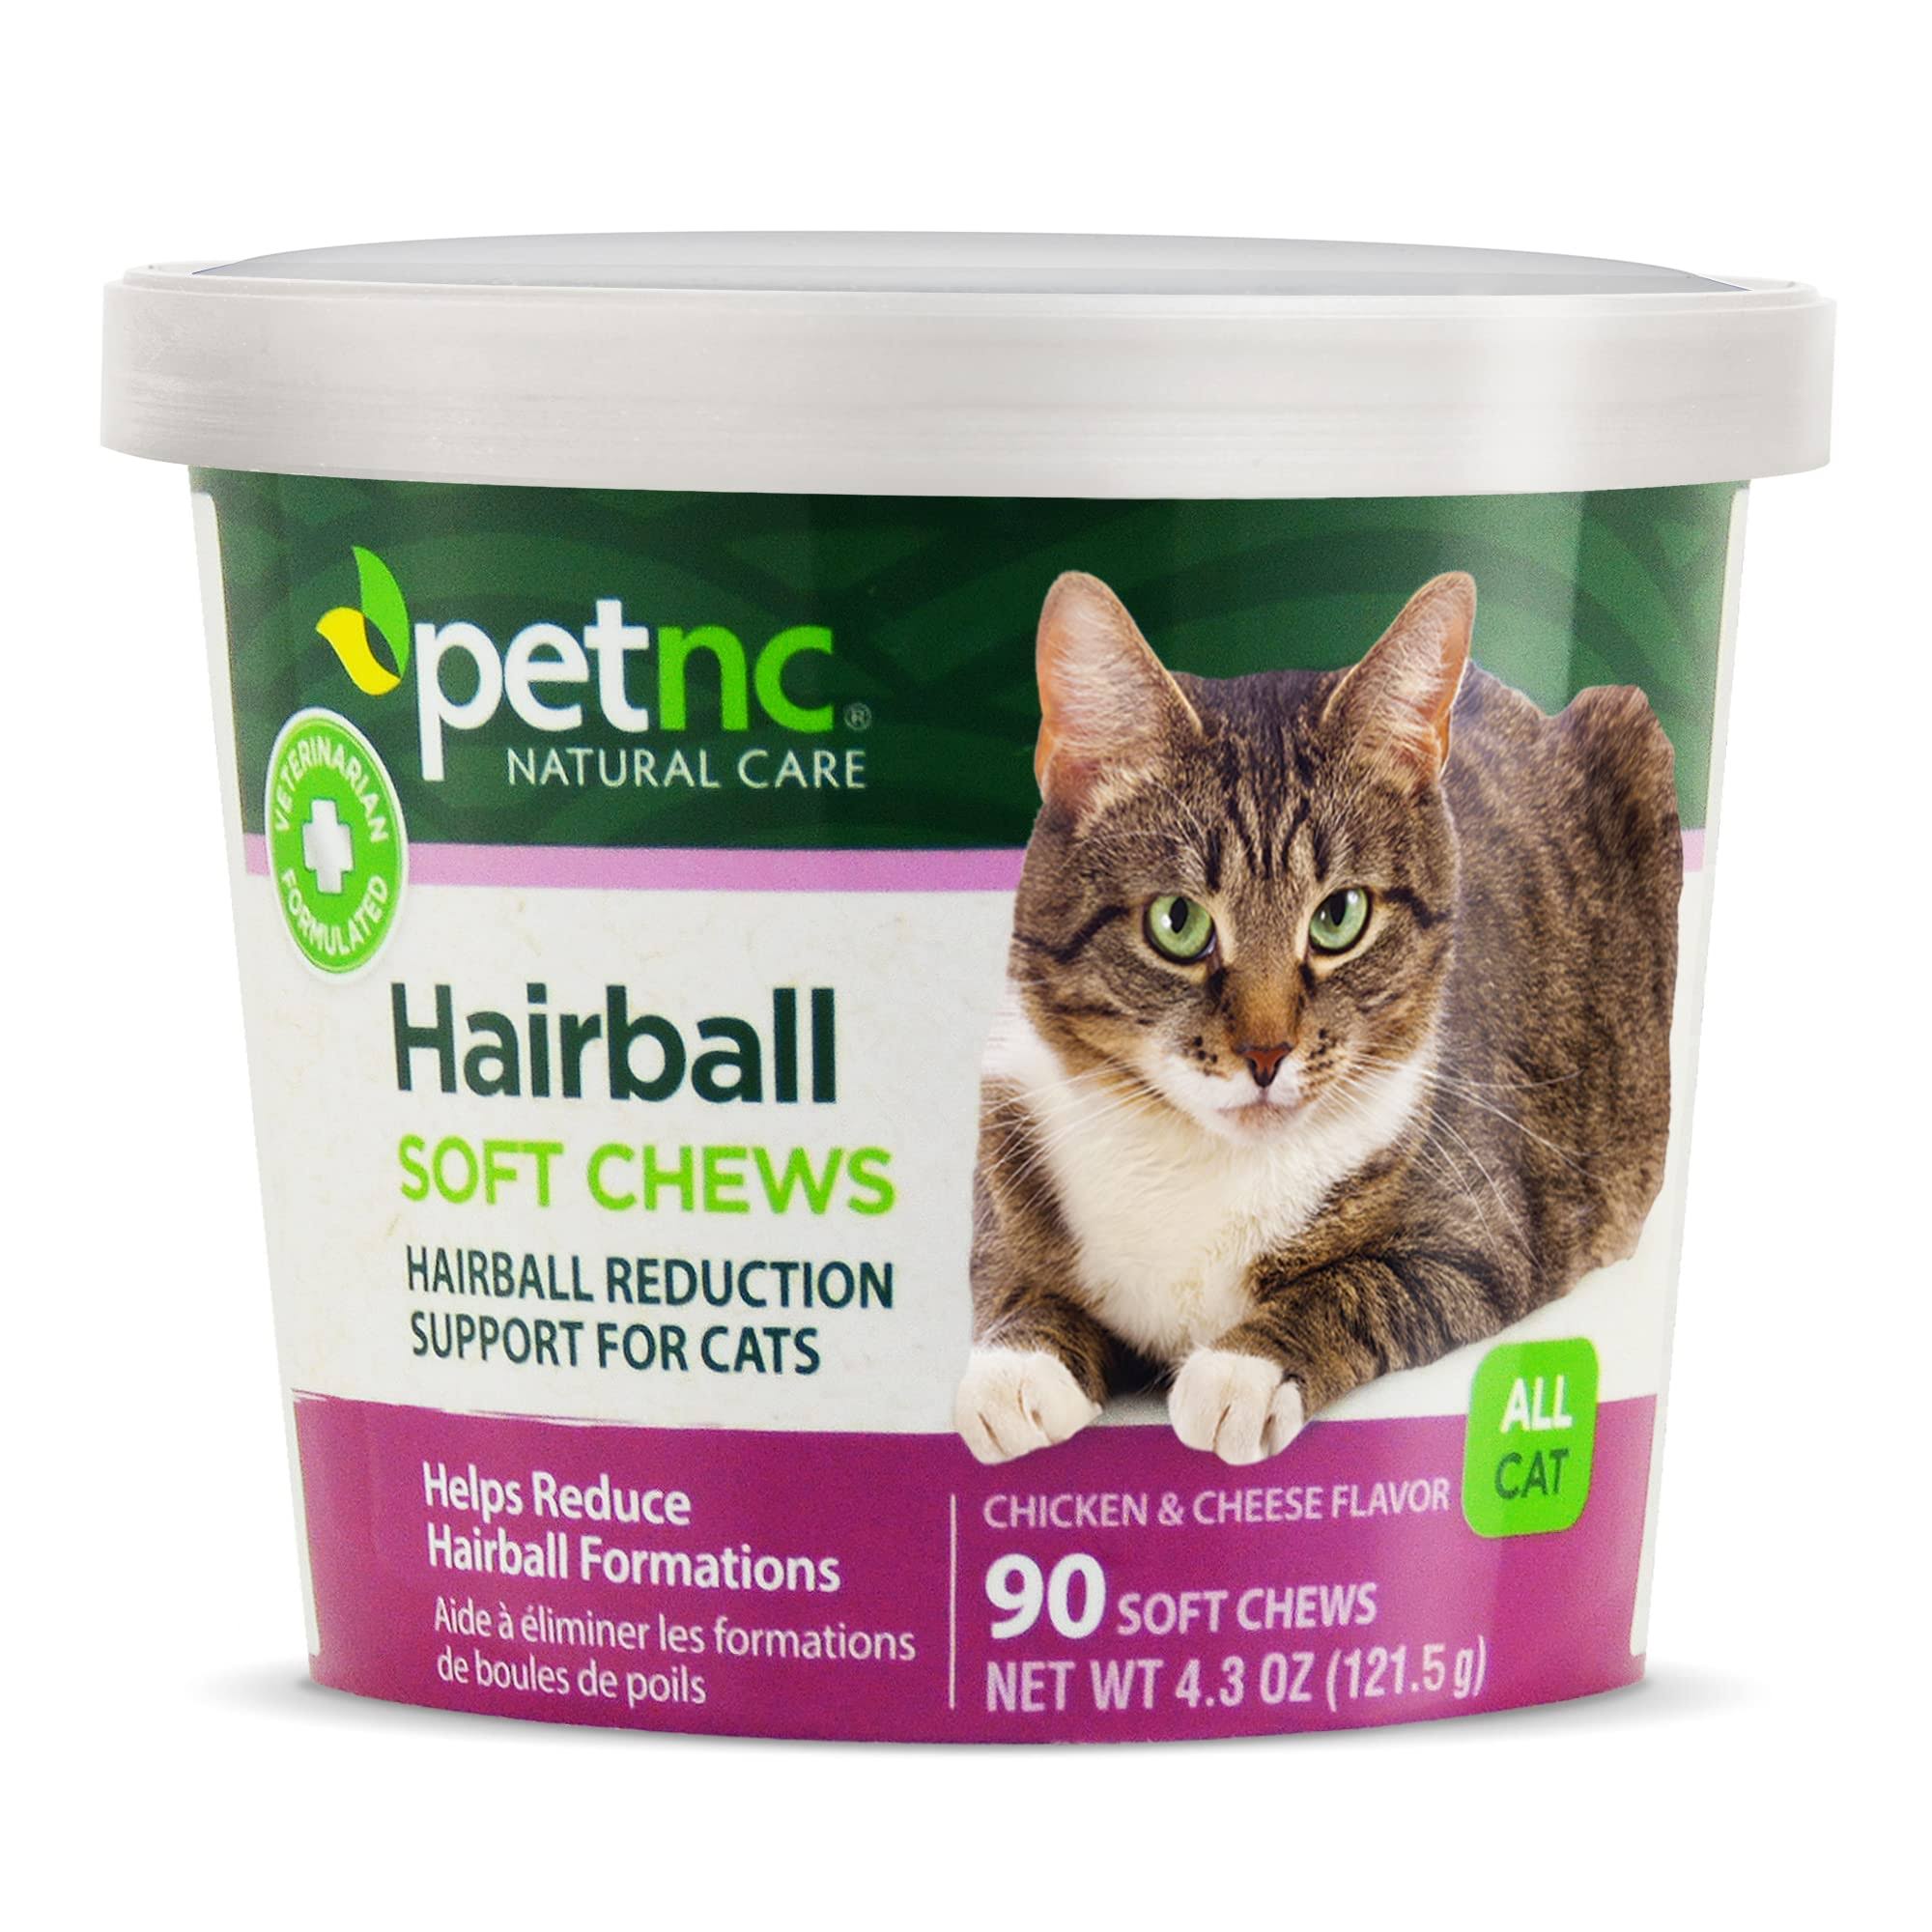 PetNC Natural Care Cat Hairball - 90 Soft Chews